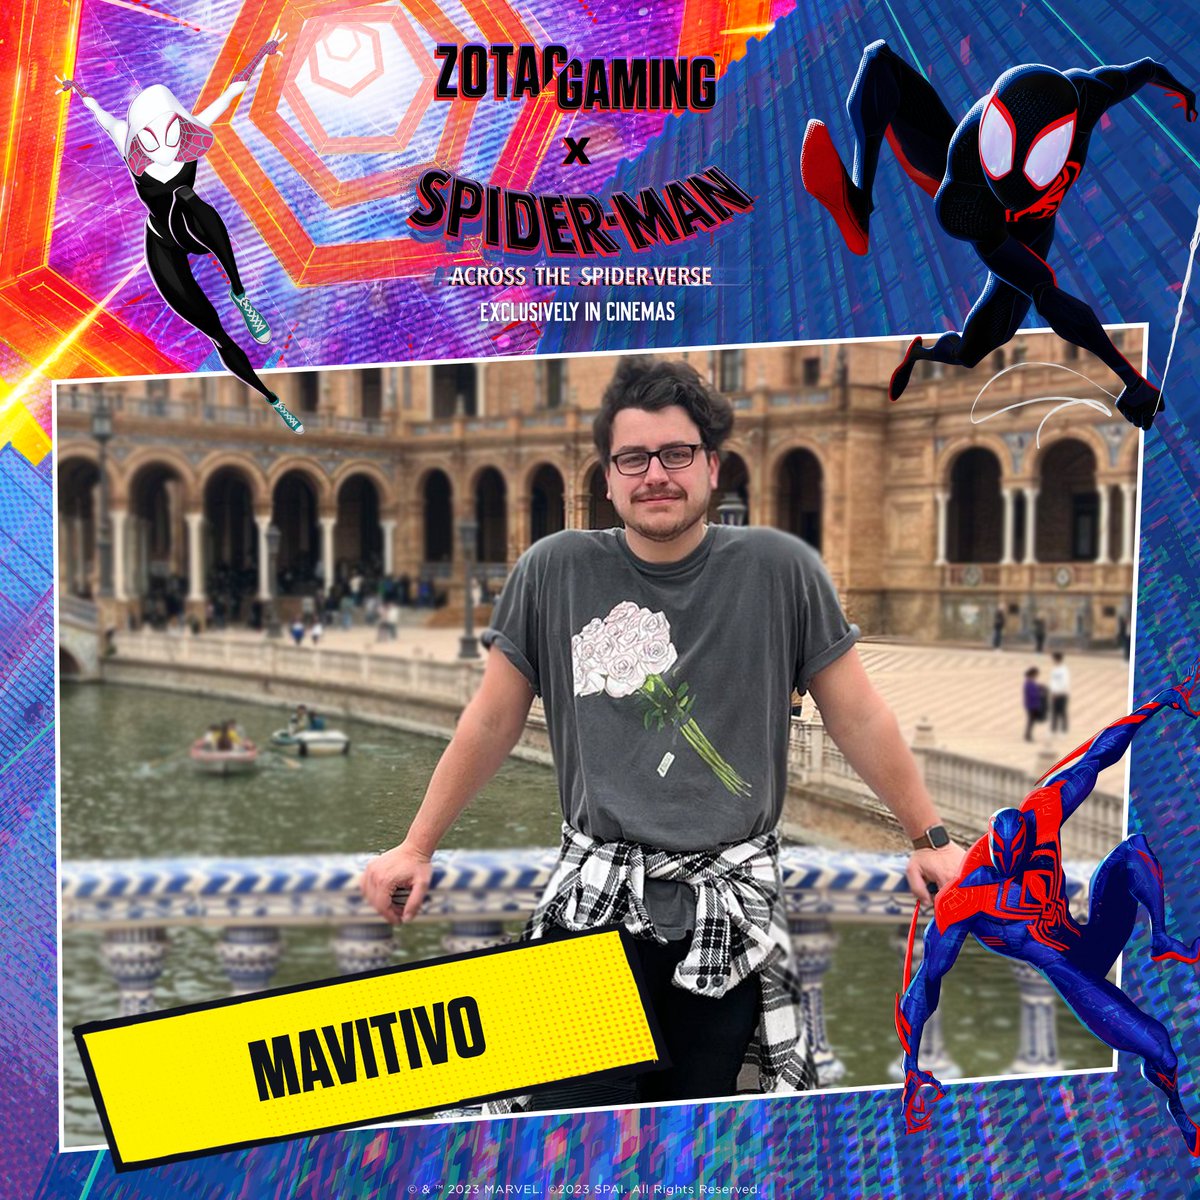 WE ARE GOING LIVE 

- This stream is sponsored by @ZOTAC_UK 
 - Spider-Man: Across the Spider-Verse is in cinemas now (which is incredible btw)

Live now - twitch.tv/mavitivo

#ad #ZotacxSpiderversemovie #SpiderVerse📷